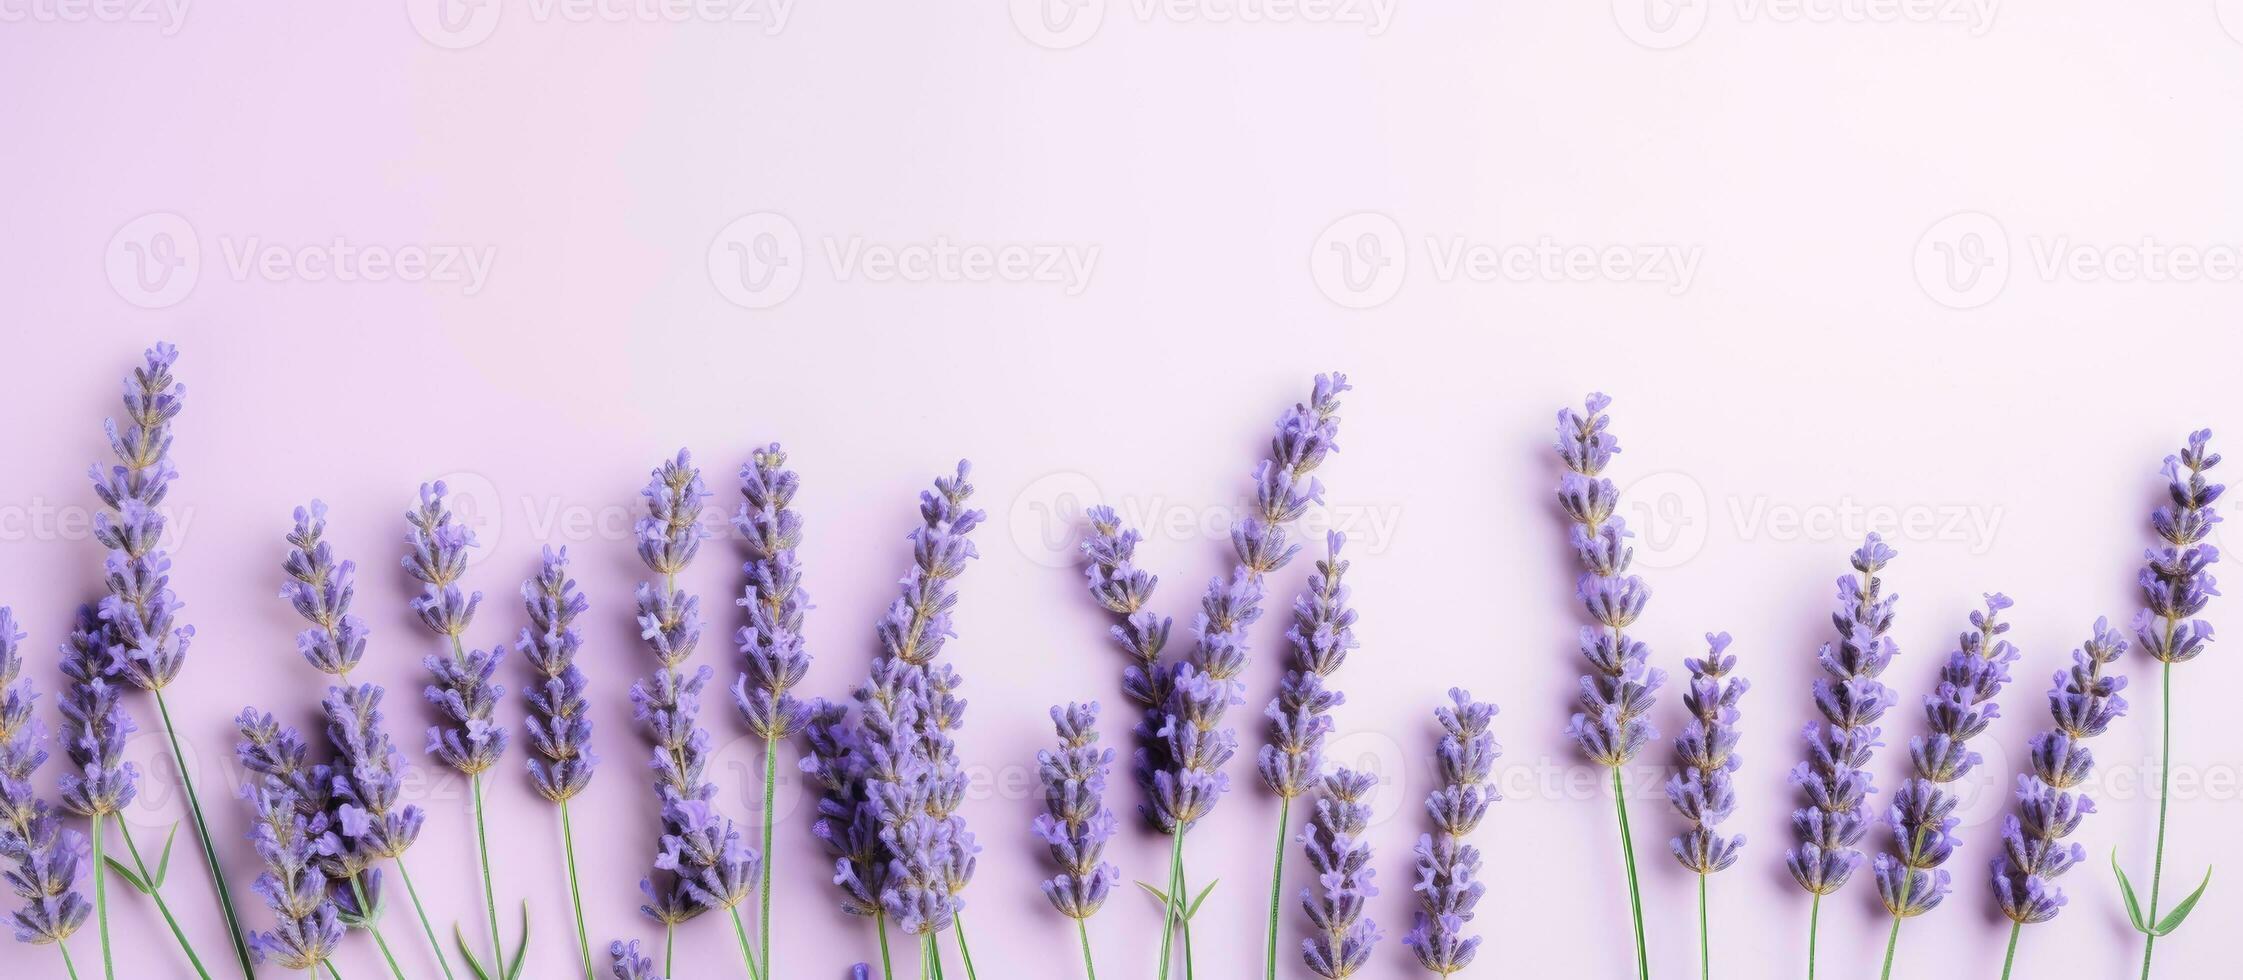 image of lavender flowers on a pastel background. The photo is taken from a top view, with the